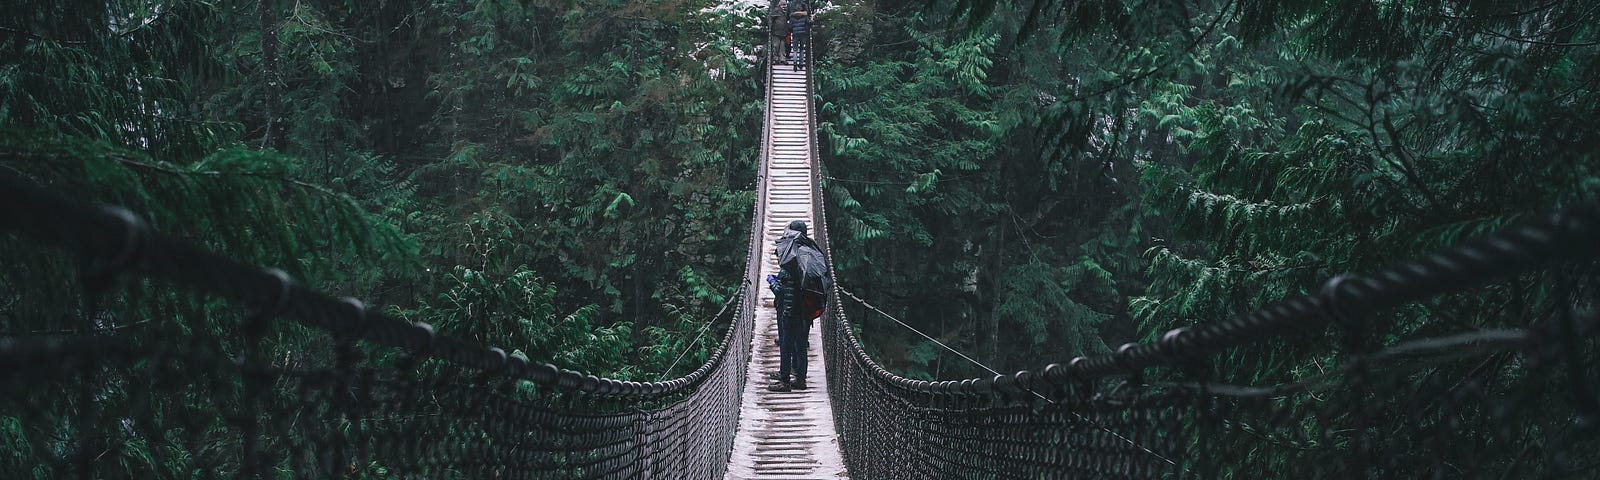 A swinging bridge stretches over an expansive rainforest.